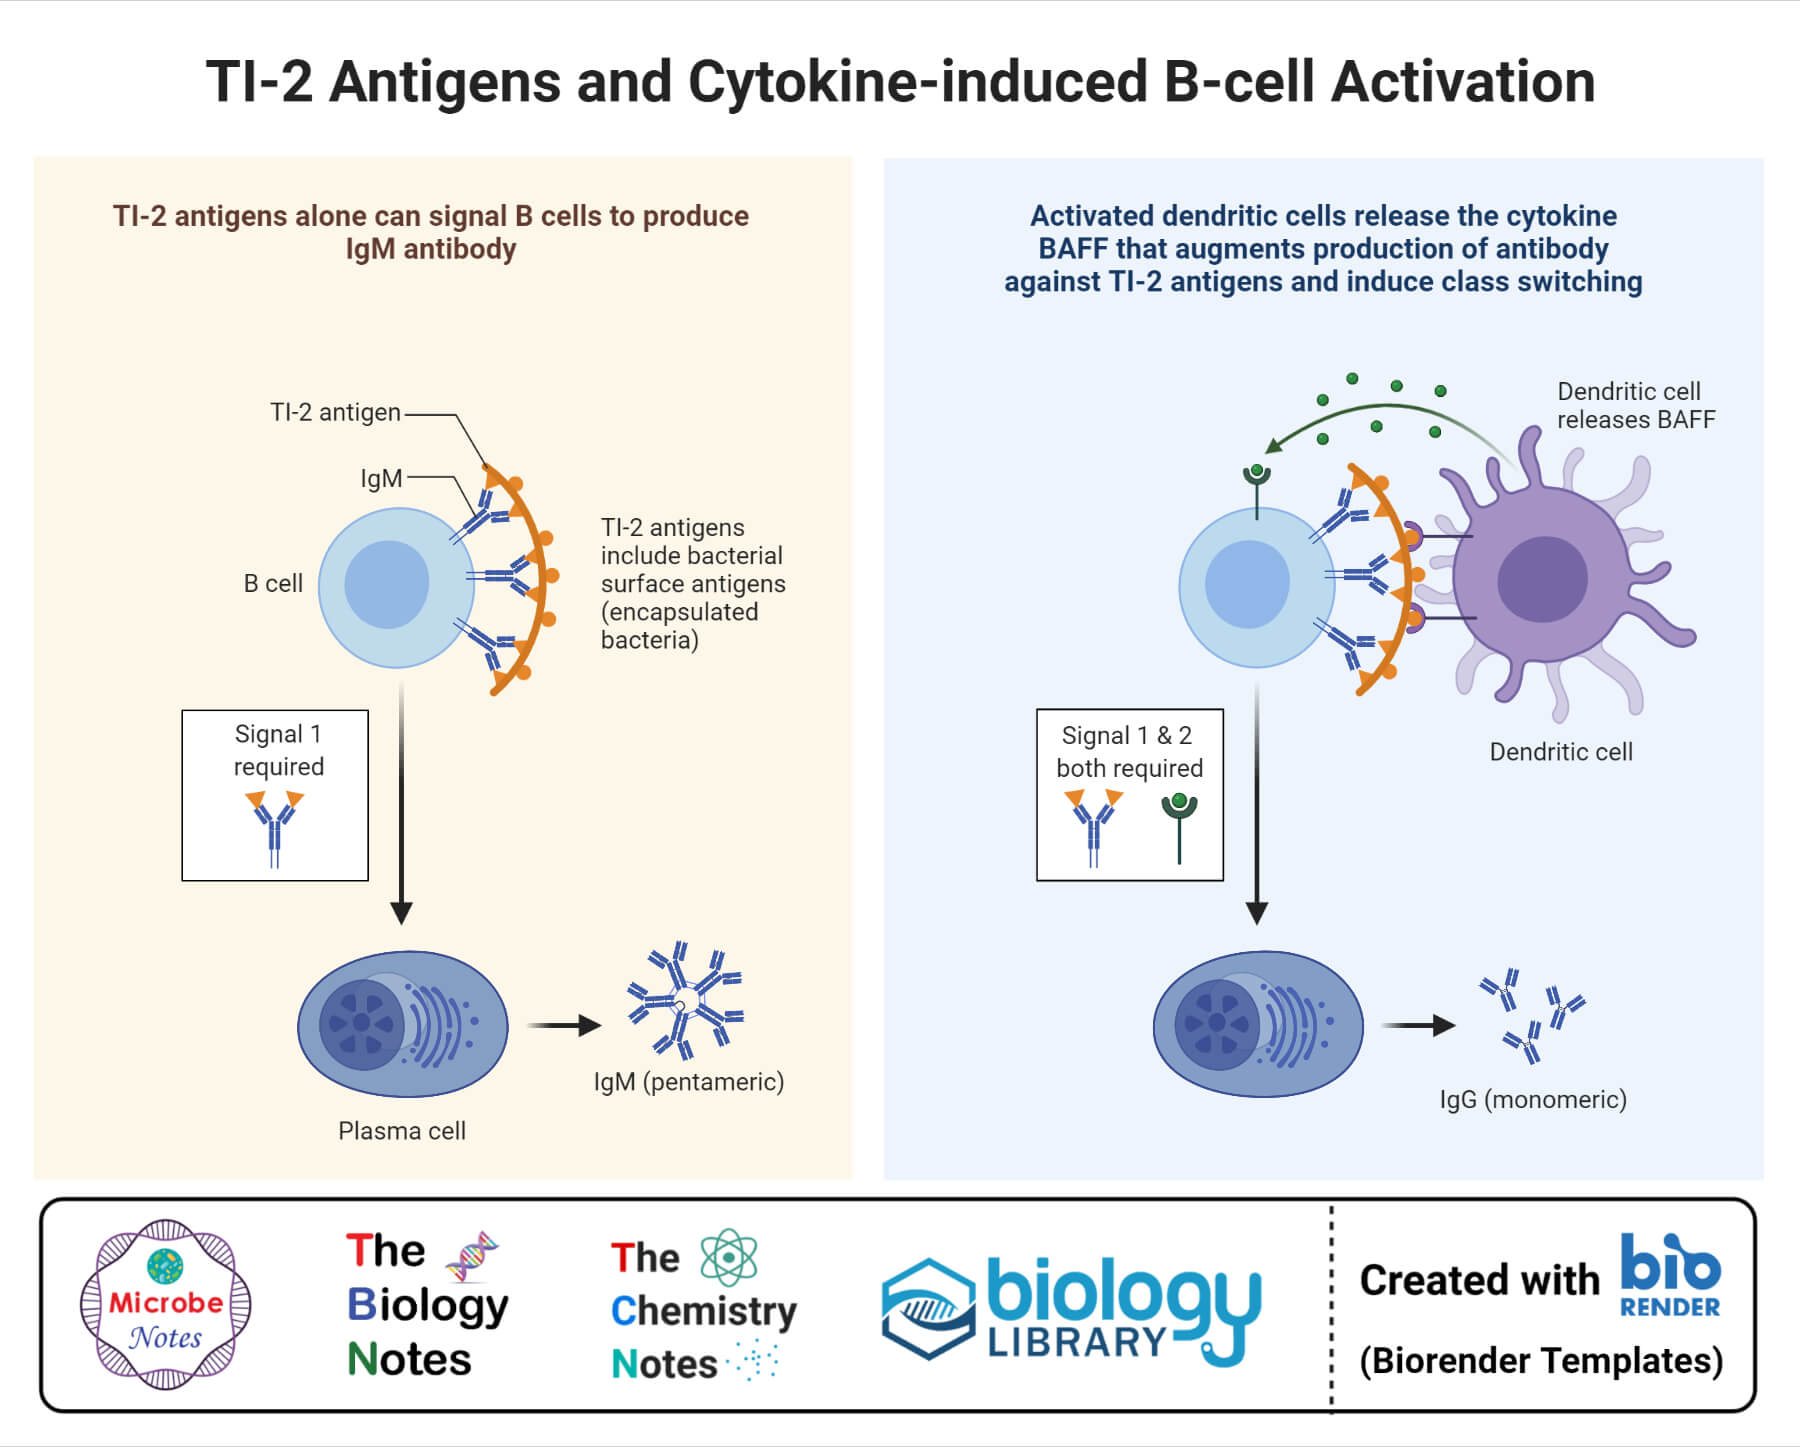 TI-2 Antigens and Cytokine-induced B-cell Activation